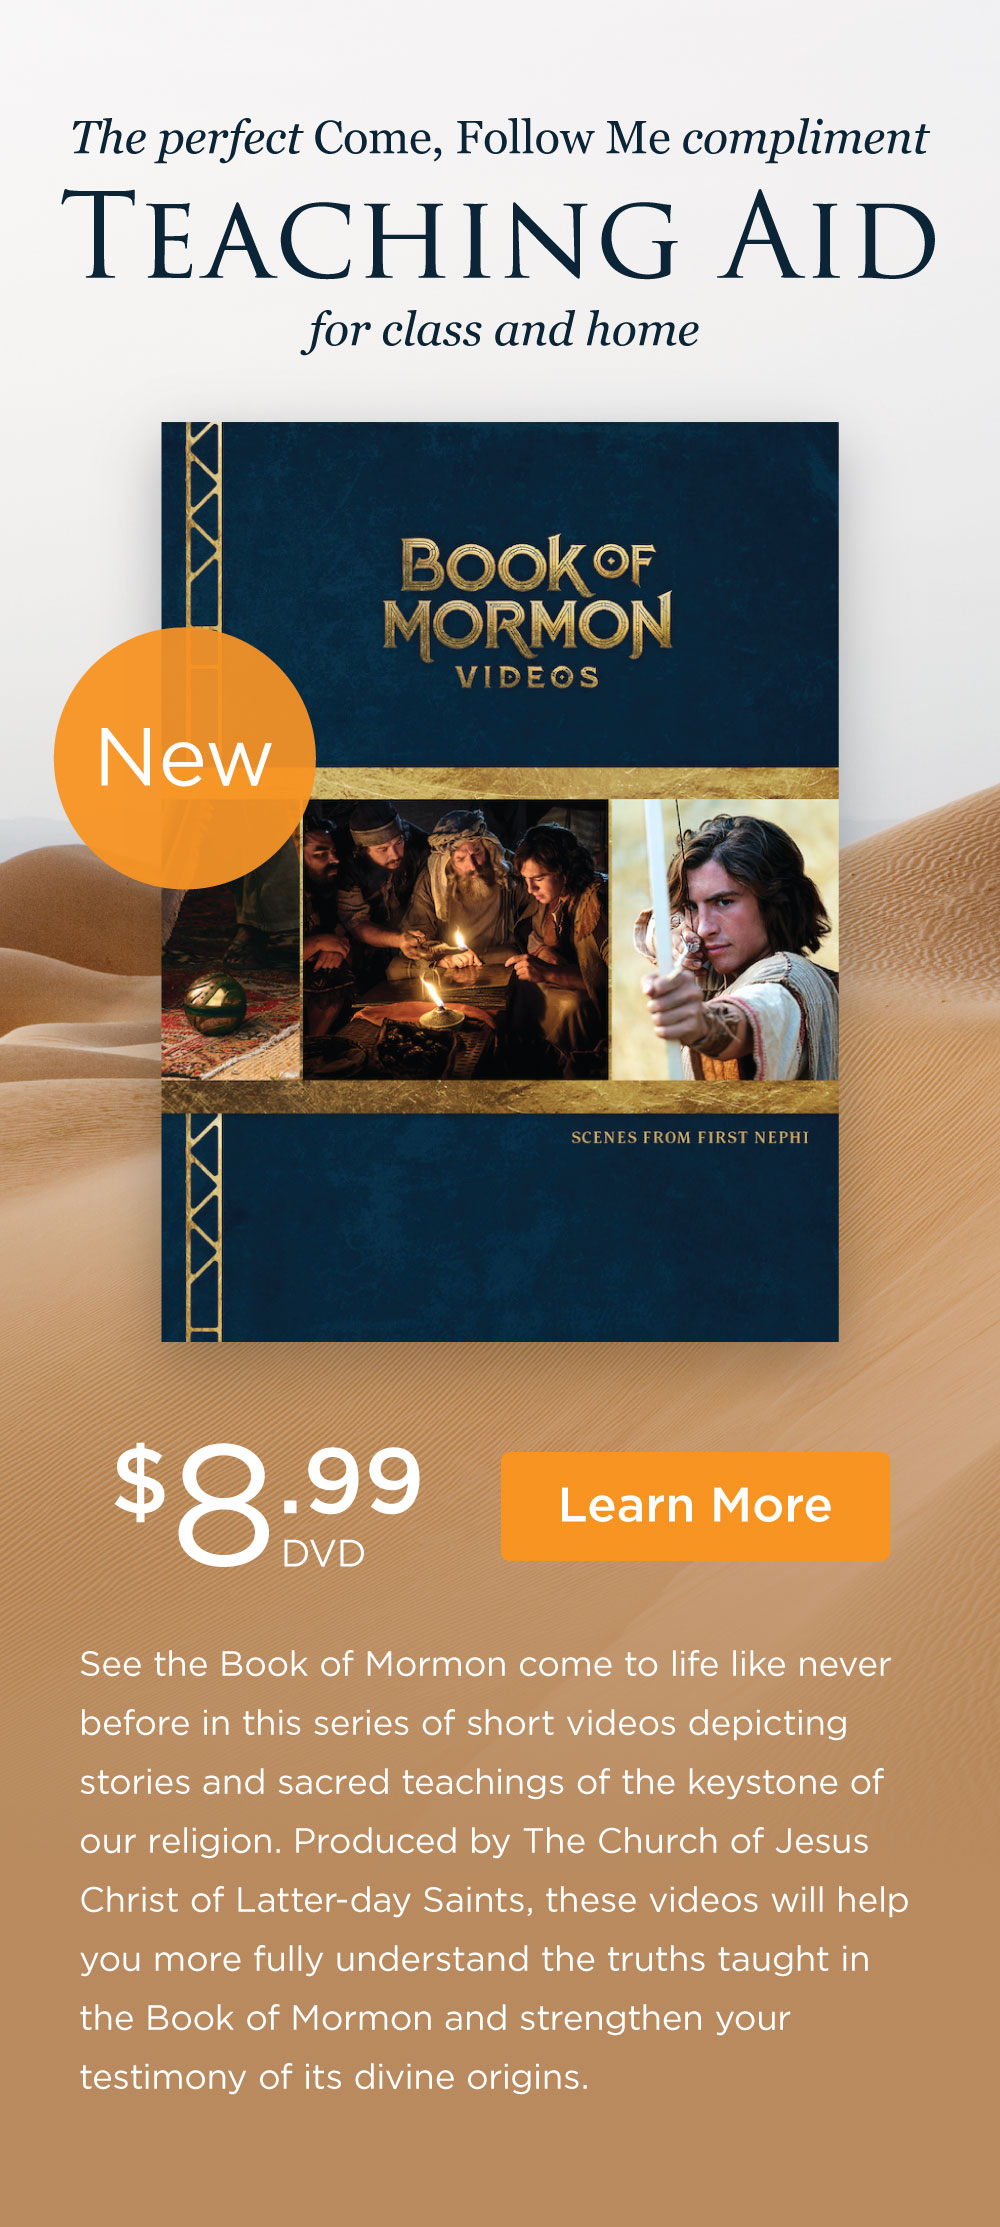 Book of Mormon Videos: Scenes from First Nephi